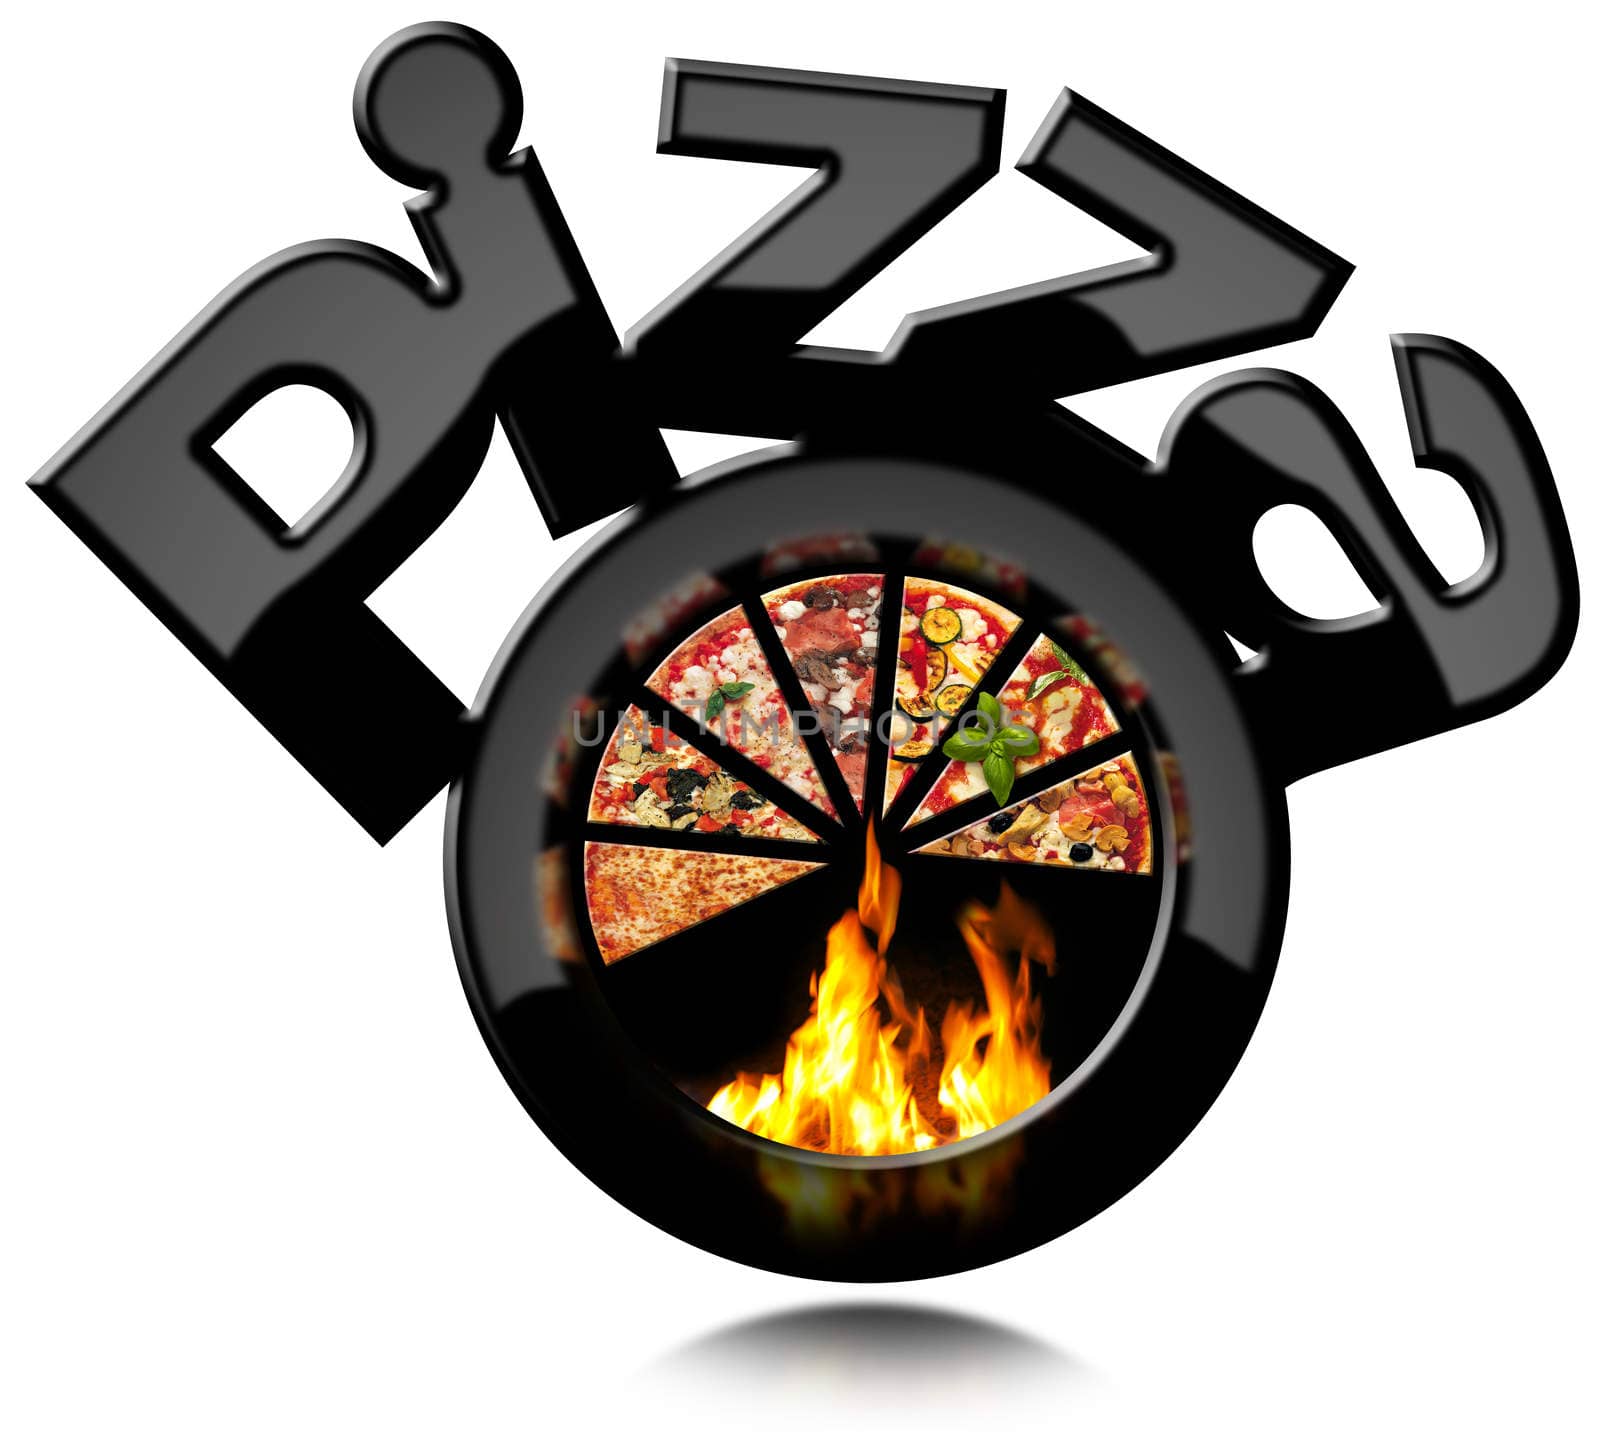 Black Symbol of Pizza with Flames by catalby